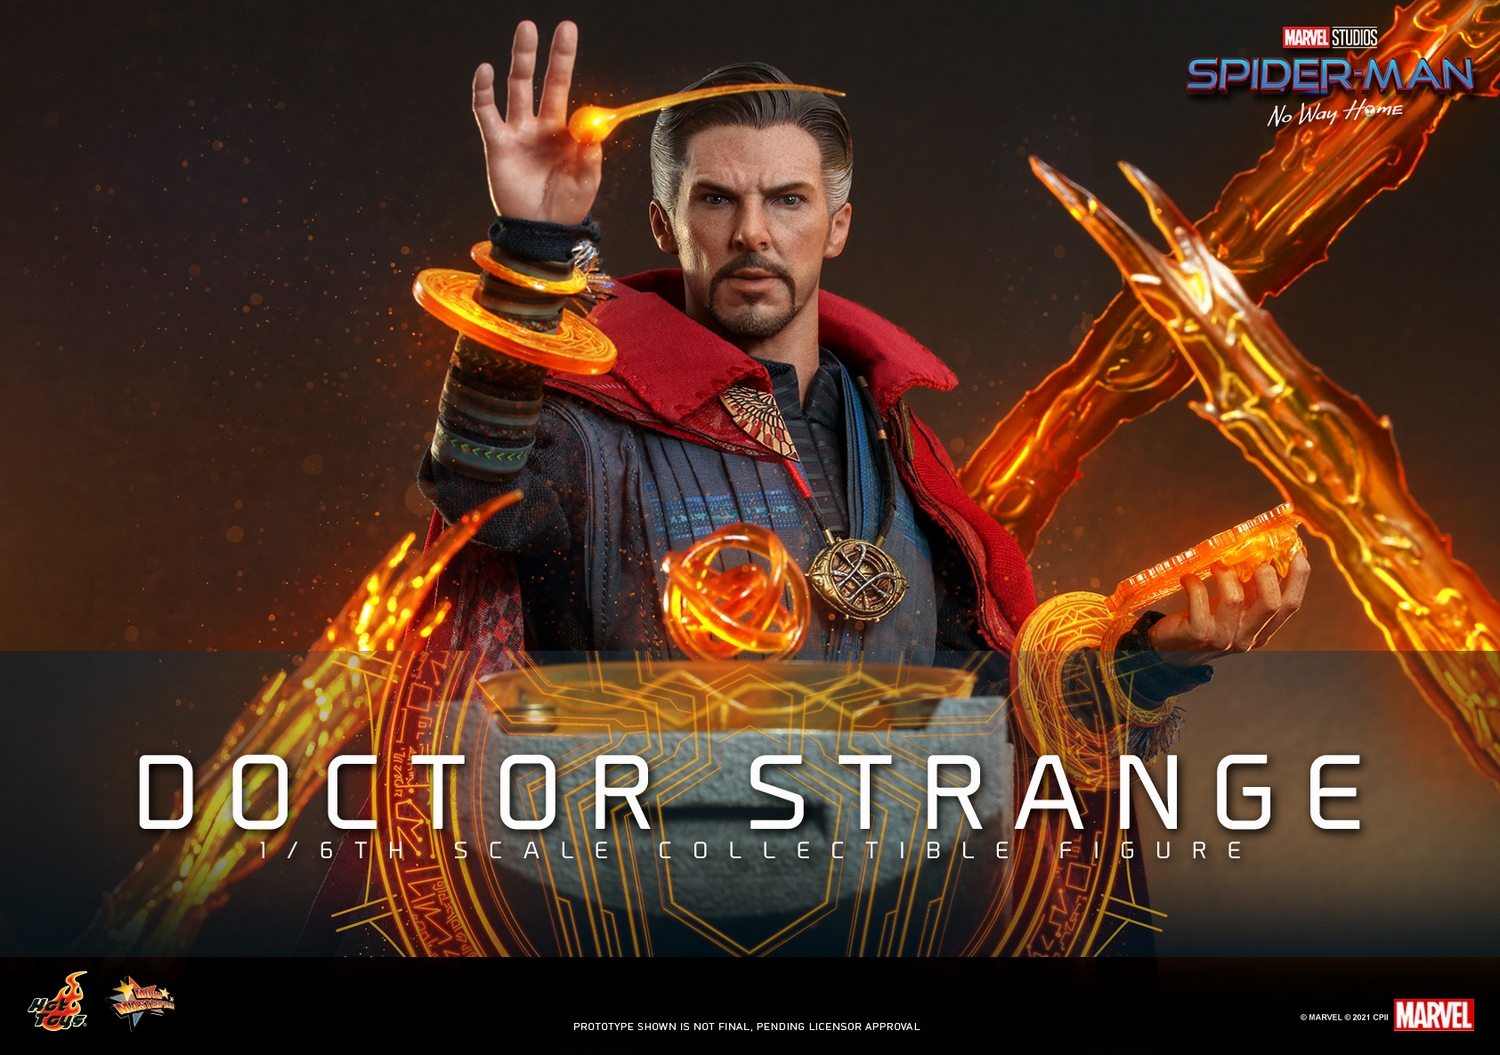 Hot Toys - SMNWH - Doctor Strange collectibe figure_Poster.jpg